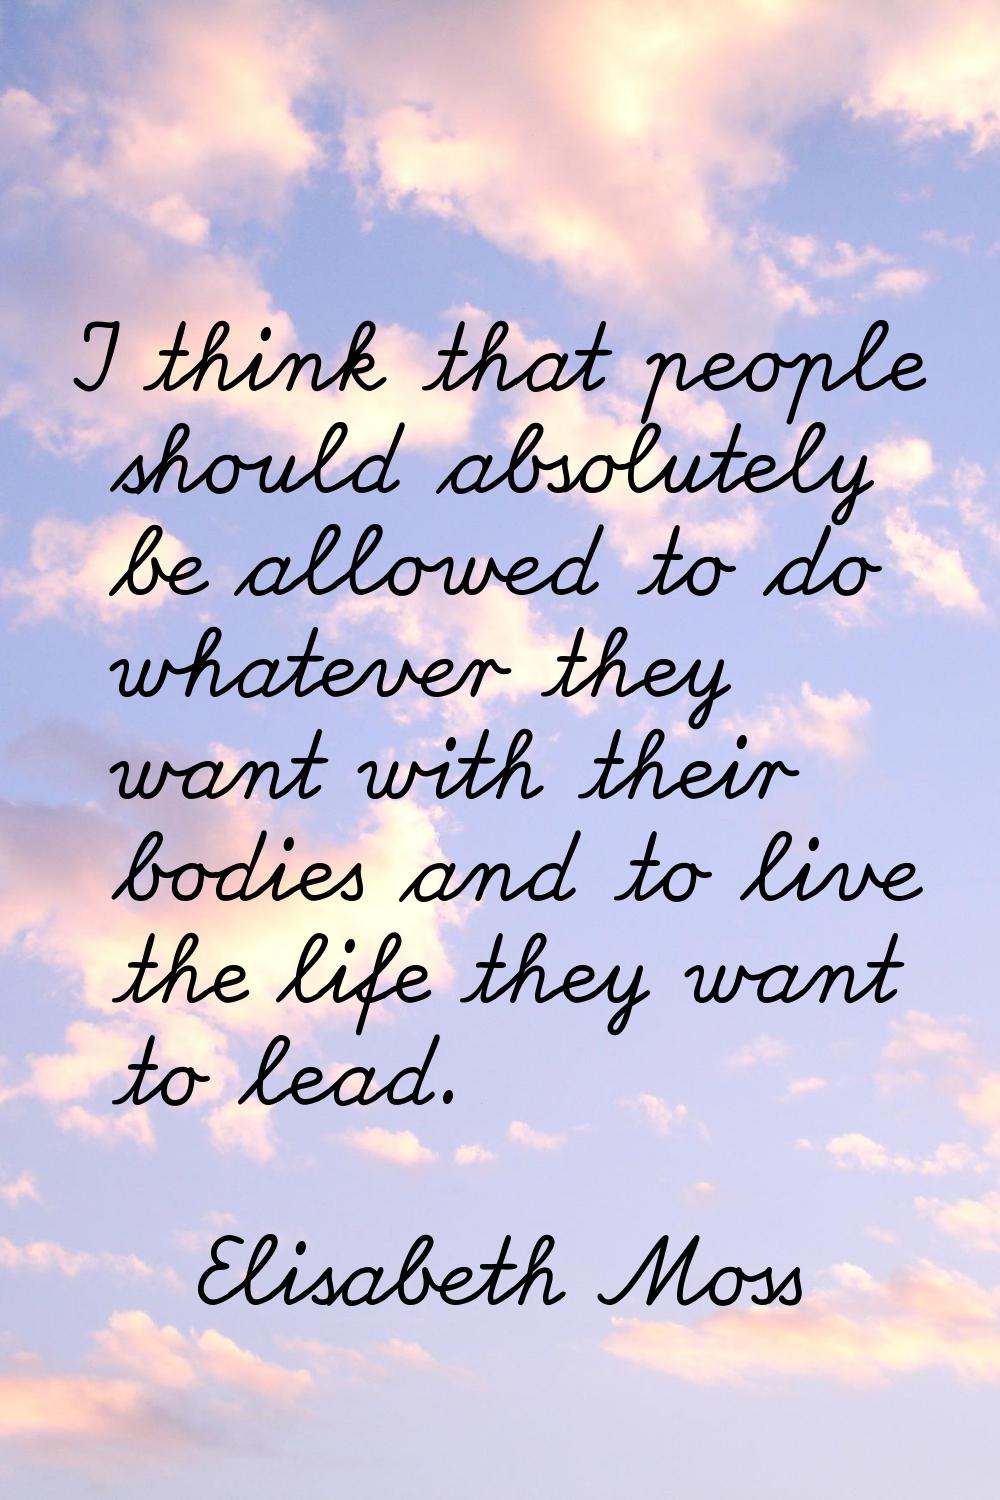 I think that people should absolutely be allowed to do whatever they want with their bodies and to 